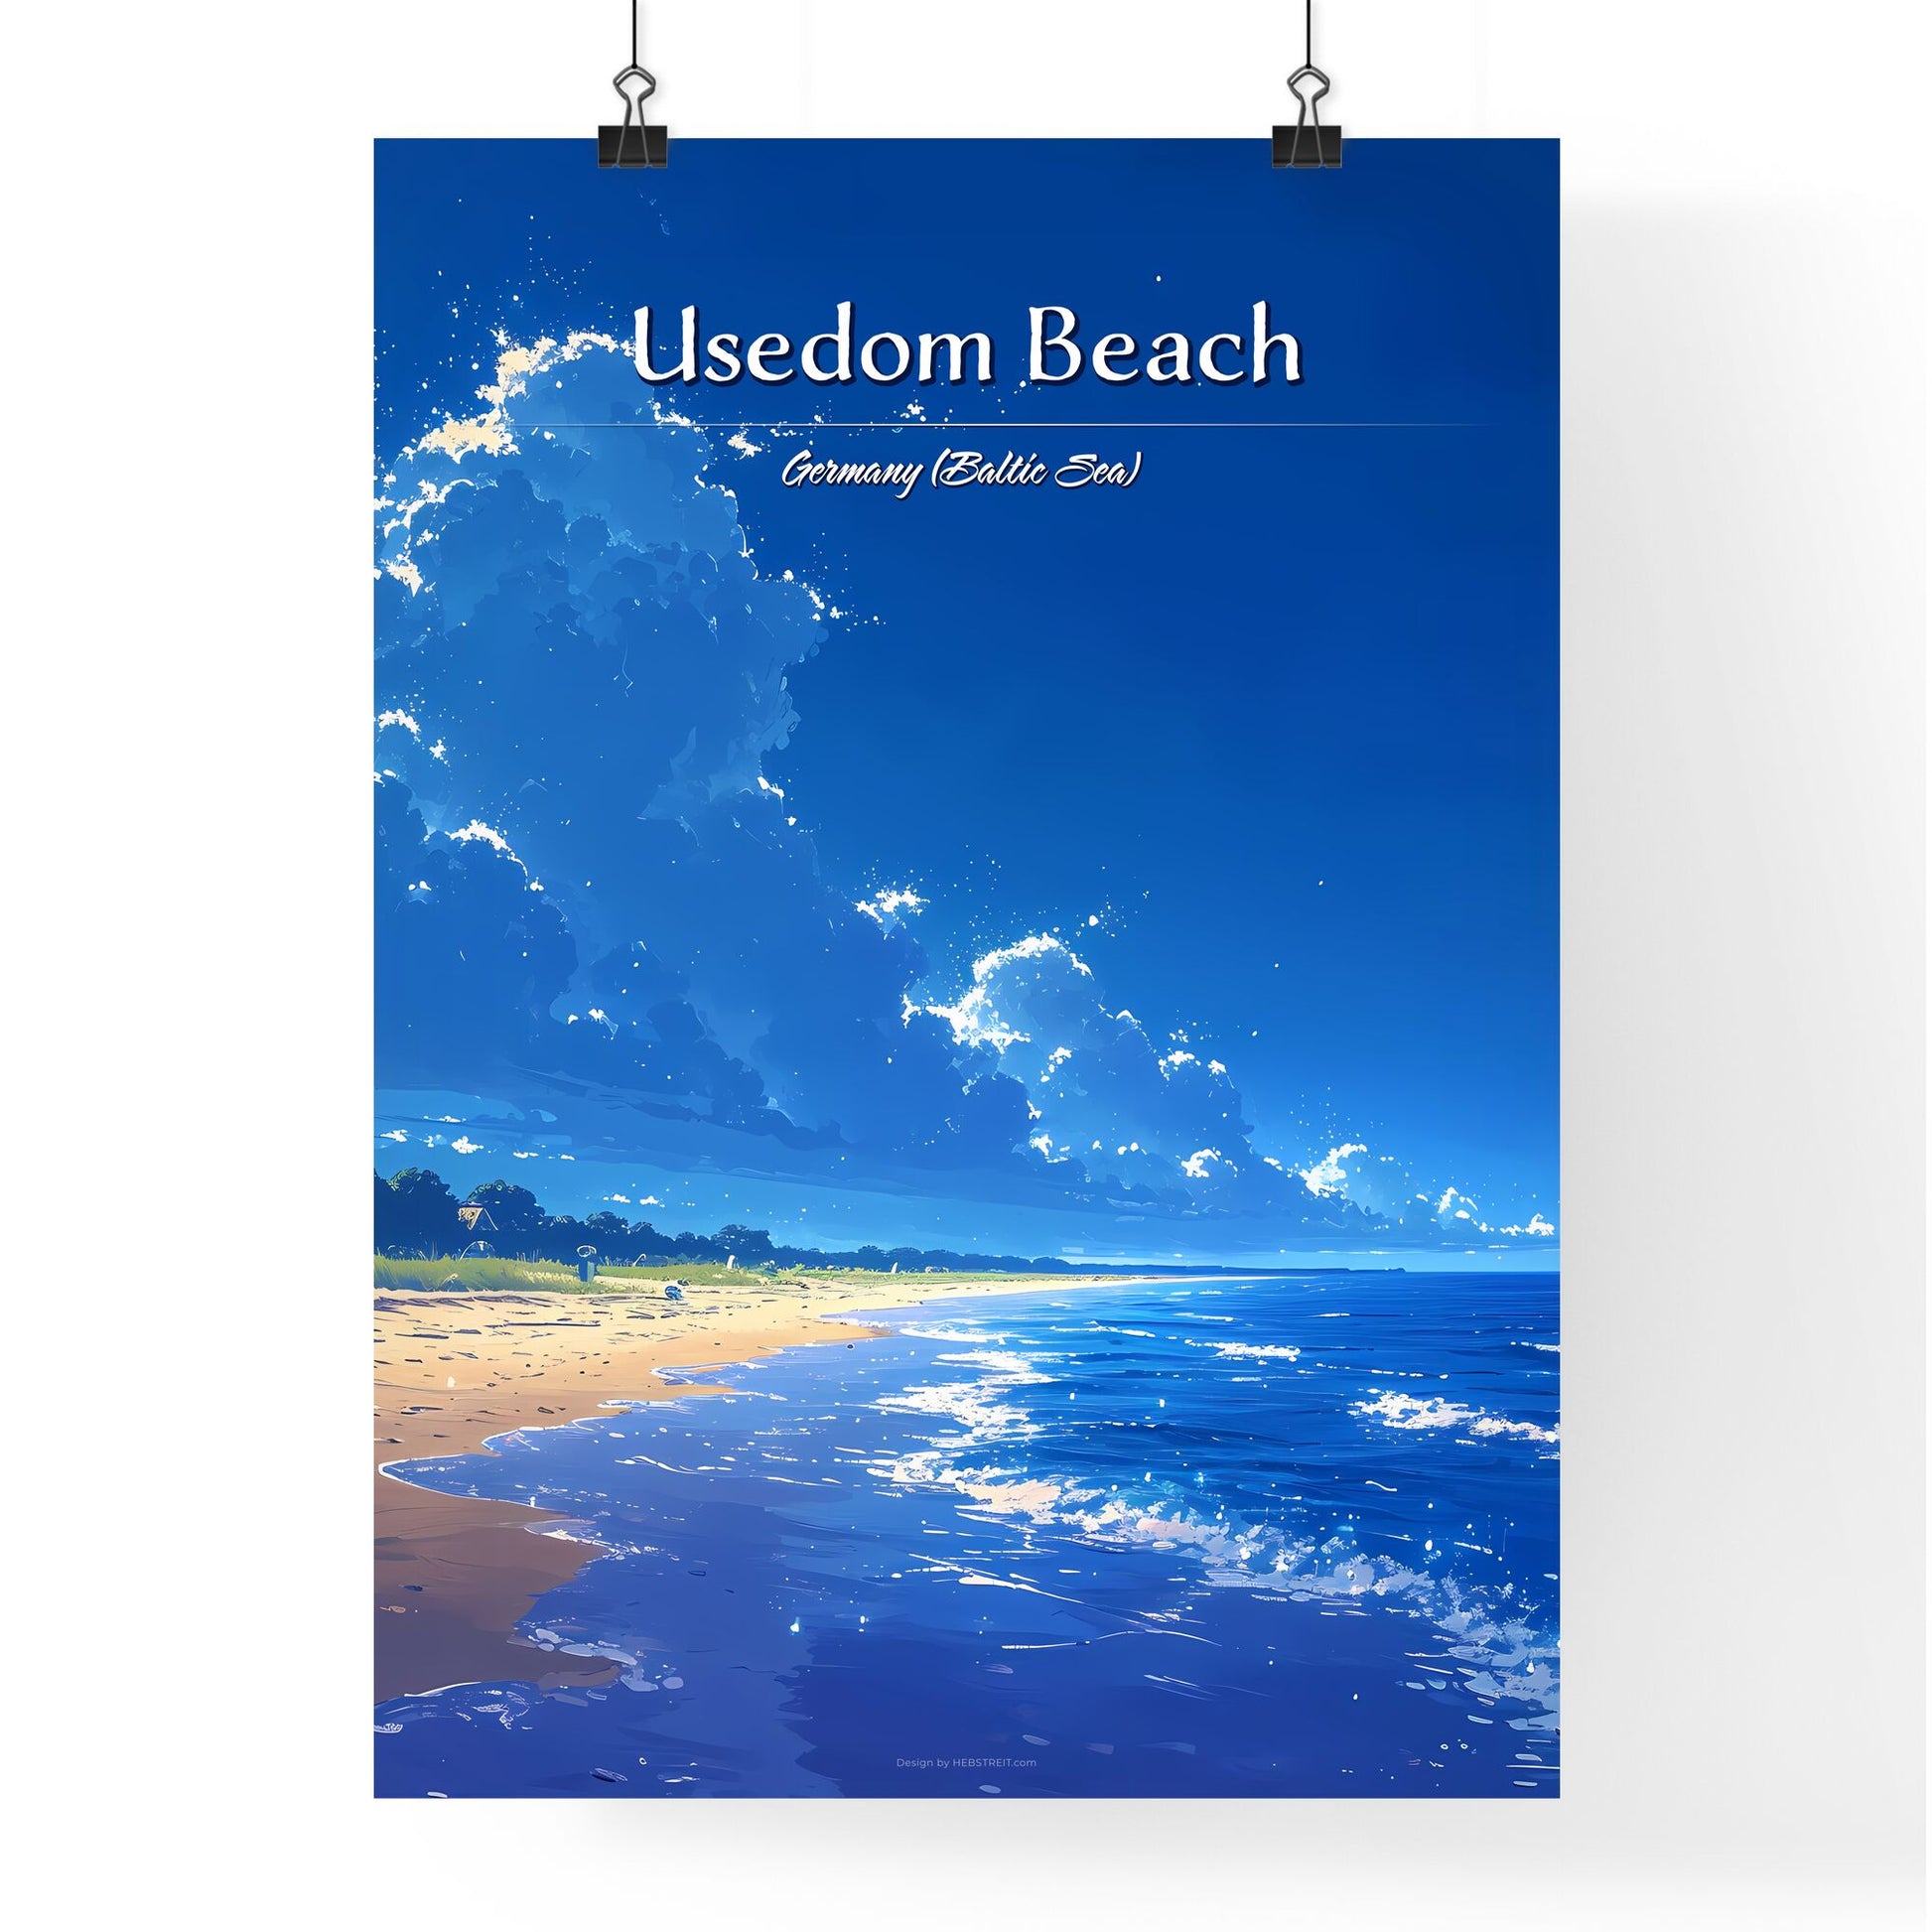 Usedom Beach, Germany (Baltic Sea) - Art print of a beach with trees and water Default Title